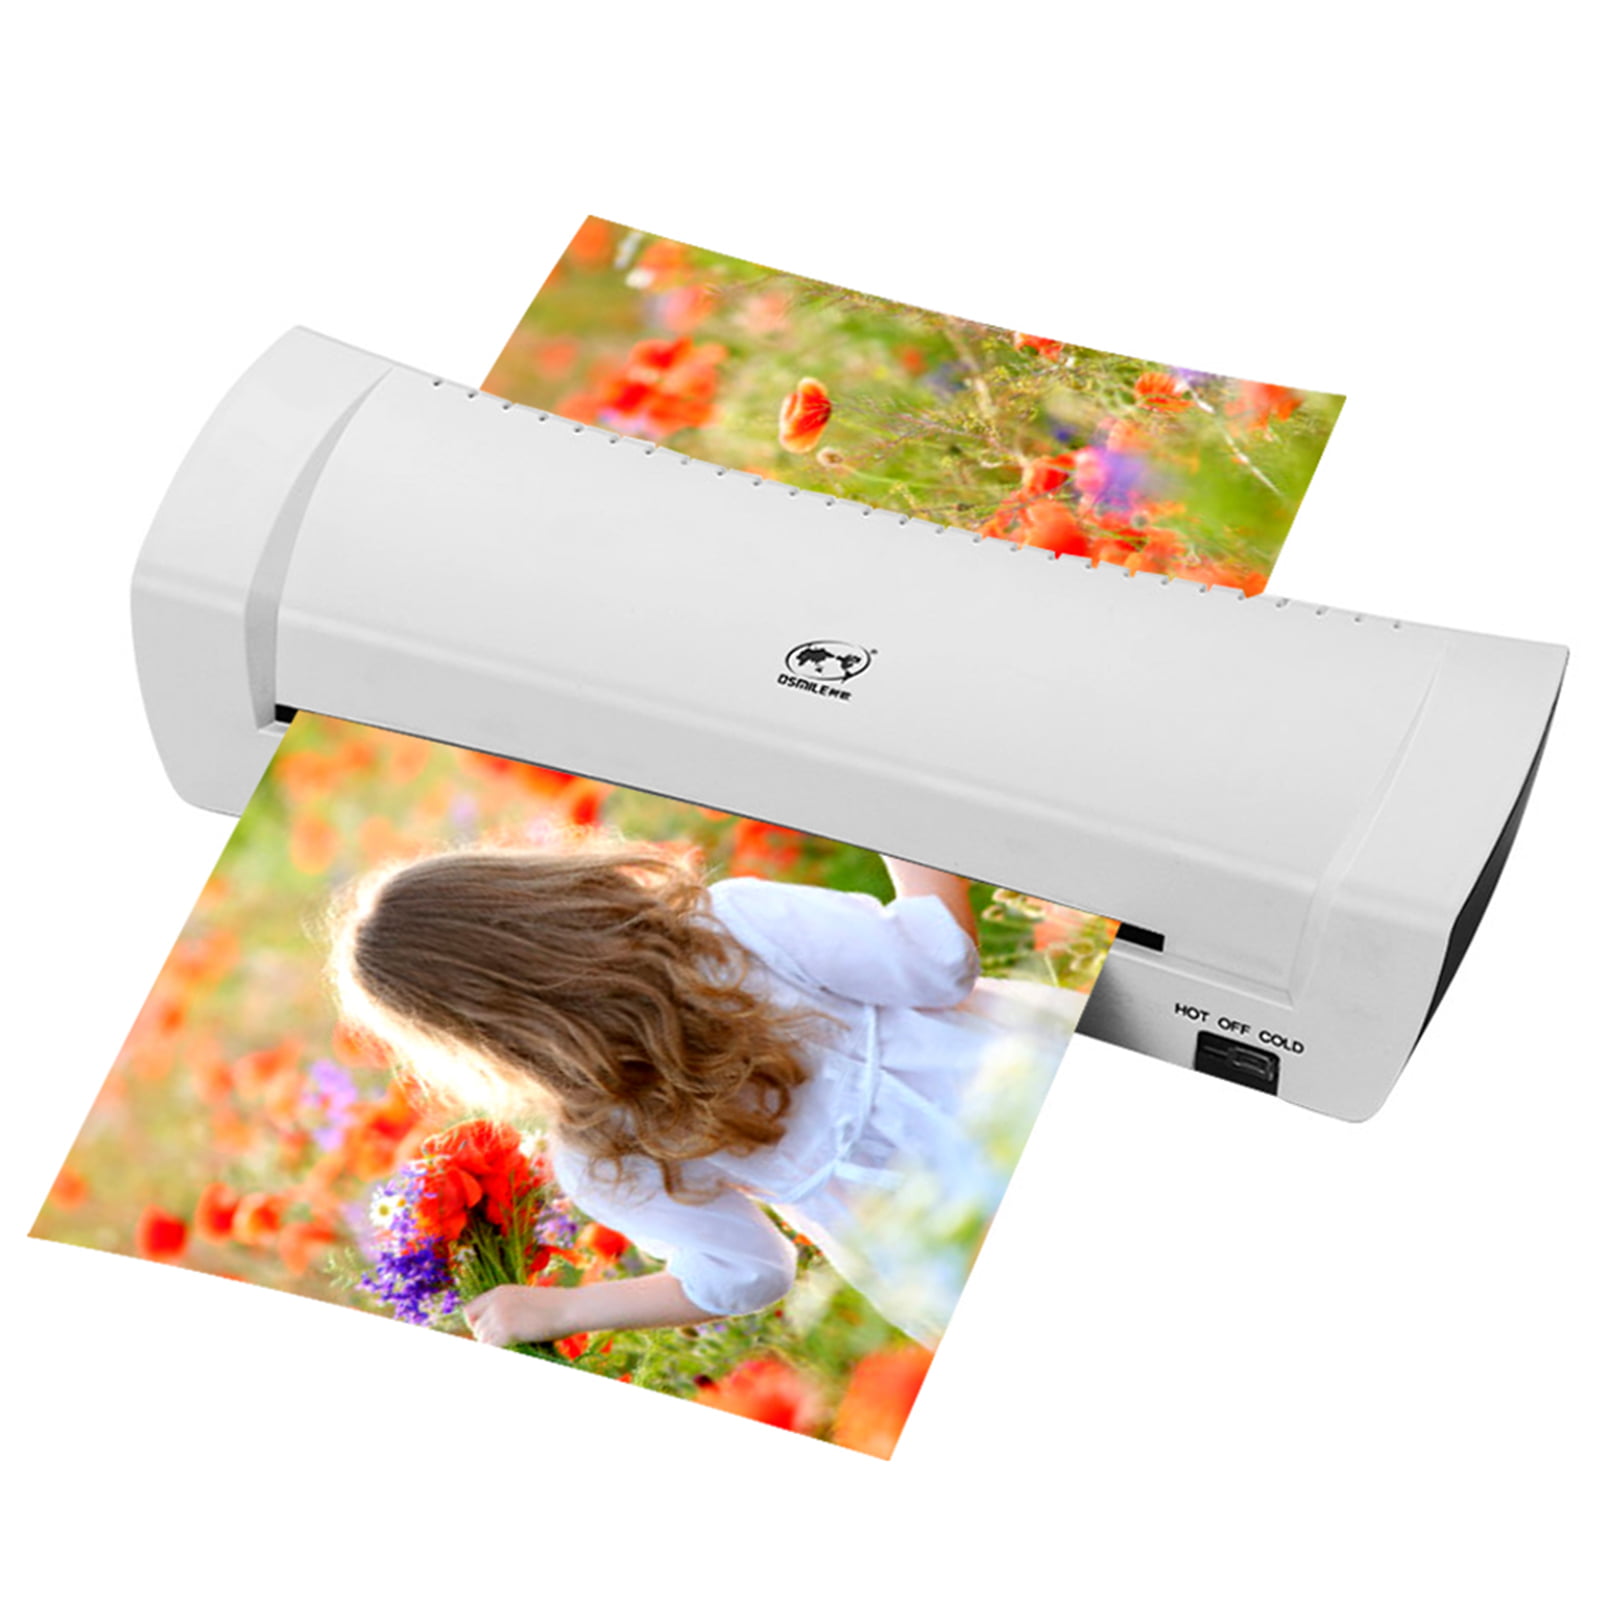 Hot & Cold Laminating Machine Rapid High Efficient Laminating 9 inch Max Width Laminator Machine,Laminator Machine,JZBRAIN A4 laminator with Trimmer Two Minutes Fast Warm-Up 